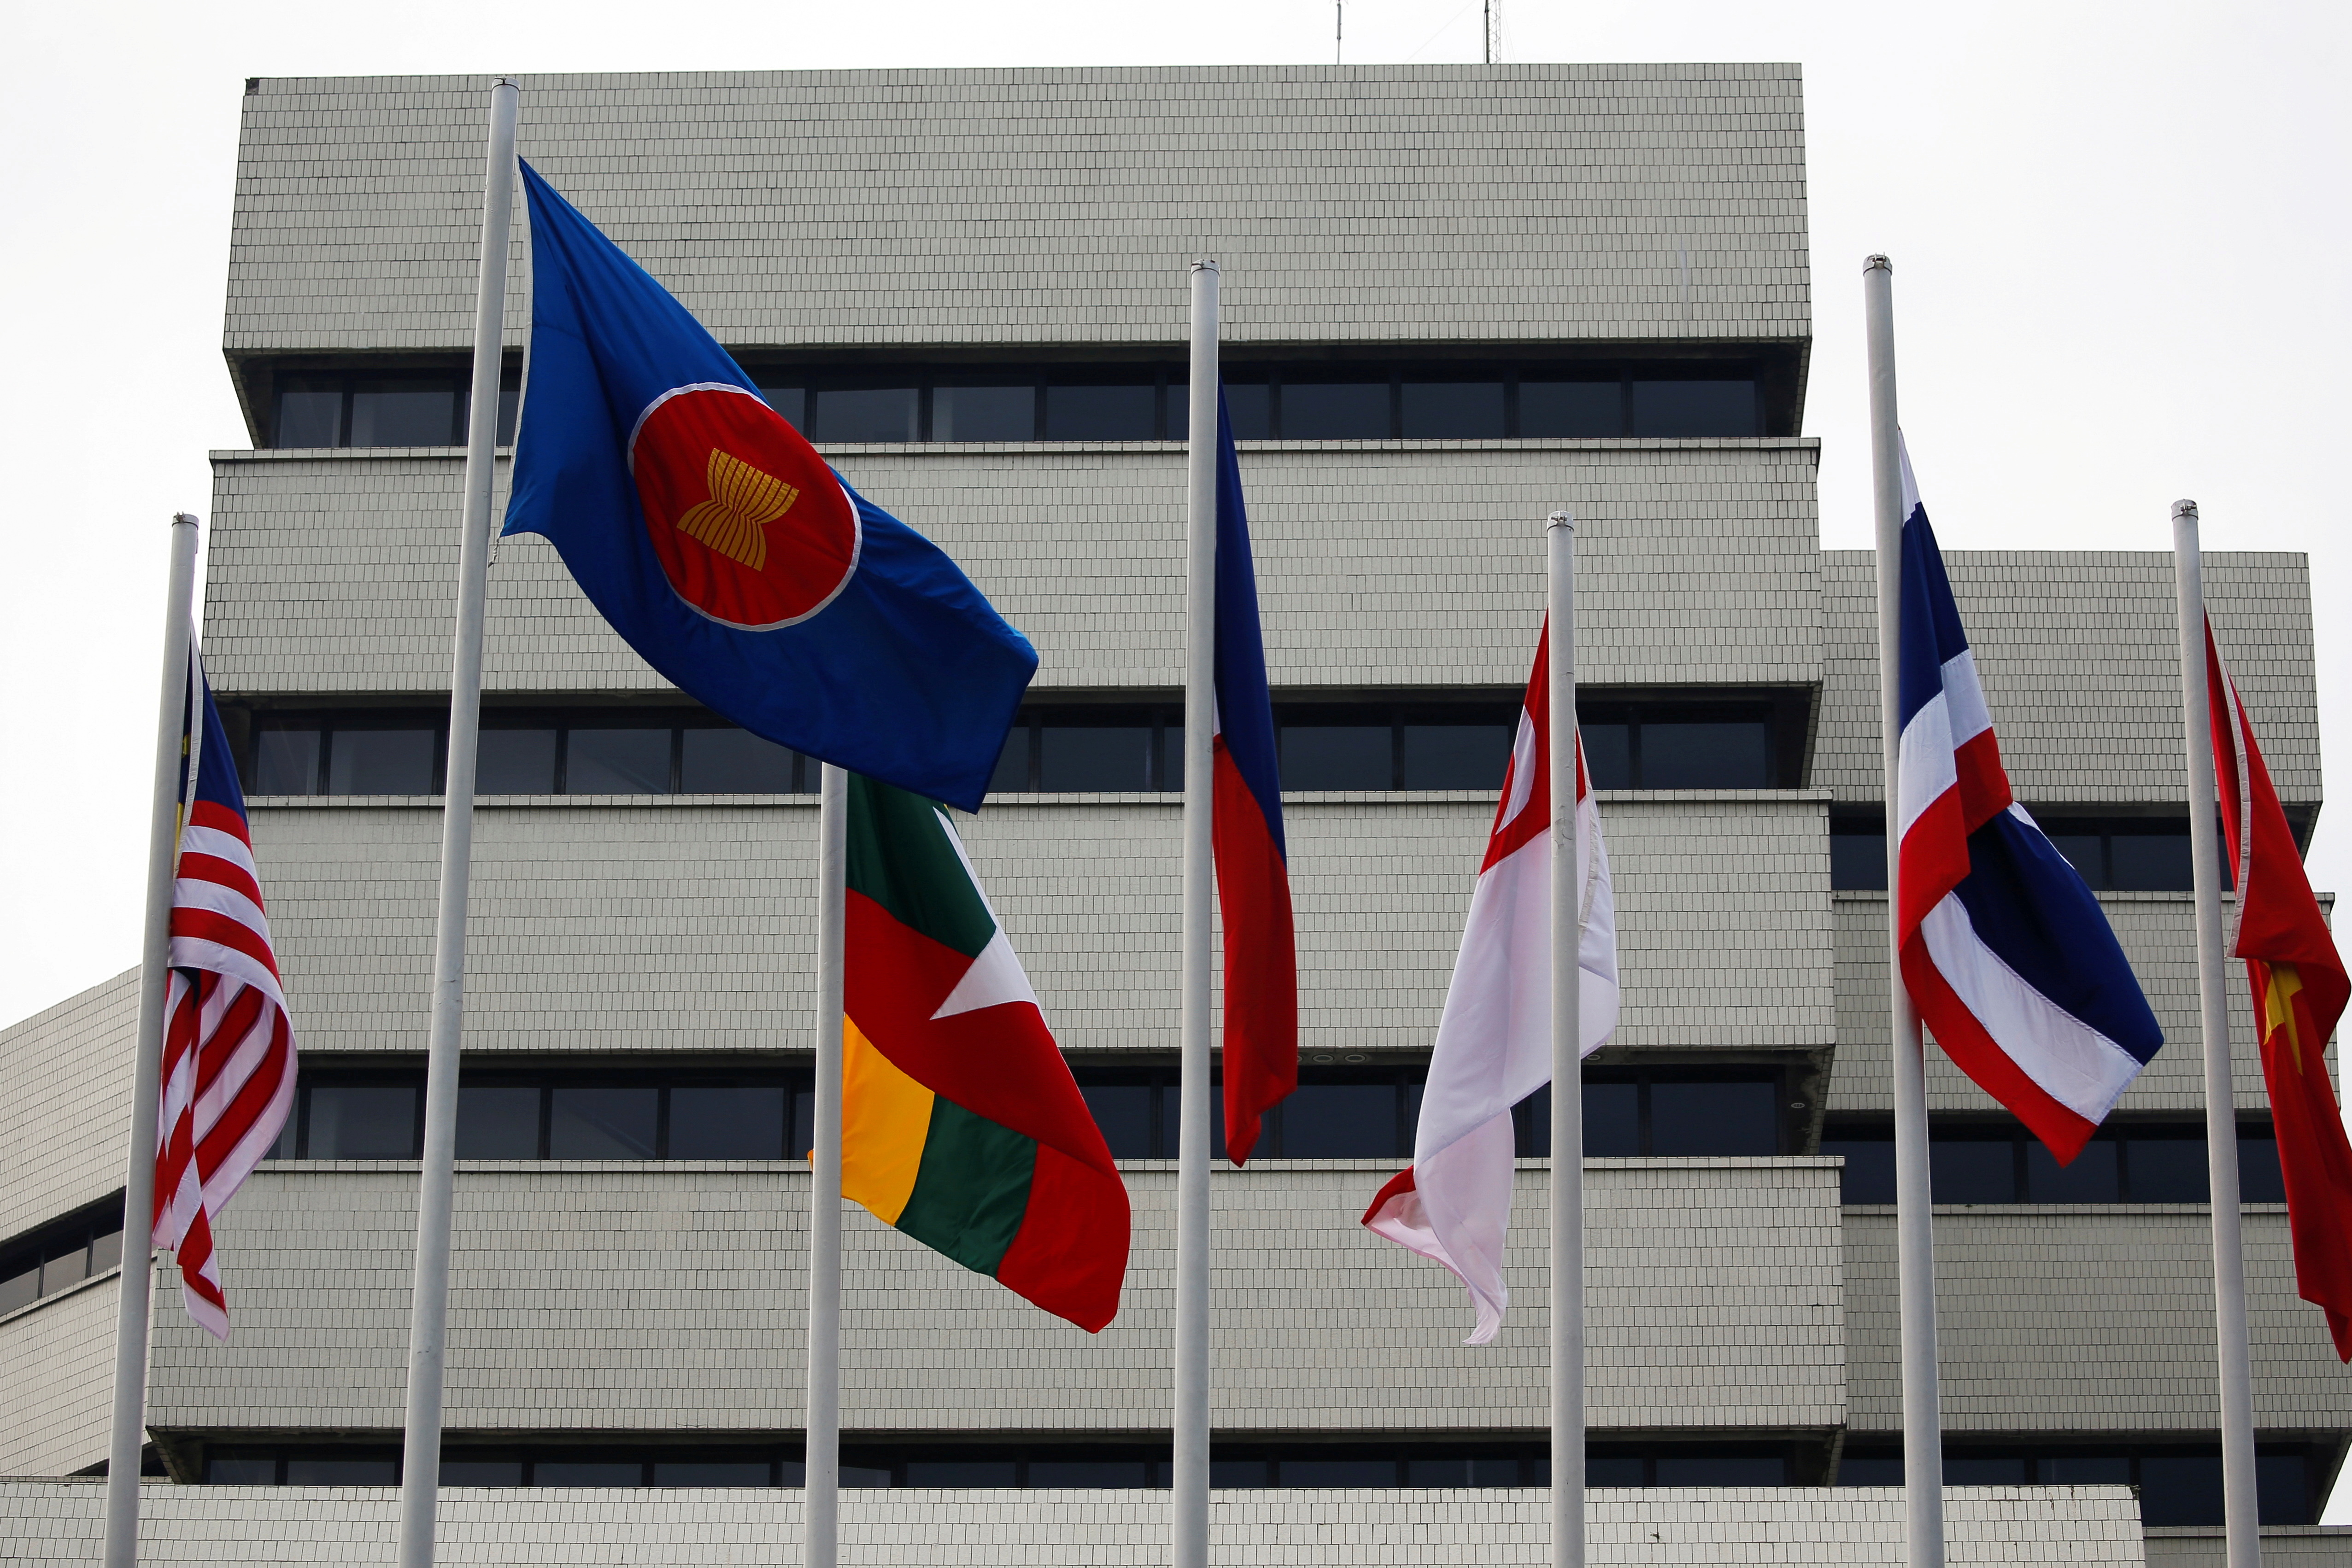 Flags are seen outside the Association of Southeast Asian Nations (ASEAN) secretariat building, ahead of the ASEAN leaders' meeting in Jakarta, Indonesia, April 23, 2021. REUTERS/Willy Kurniawan